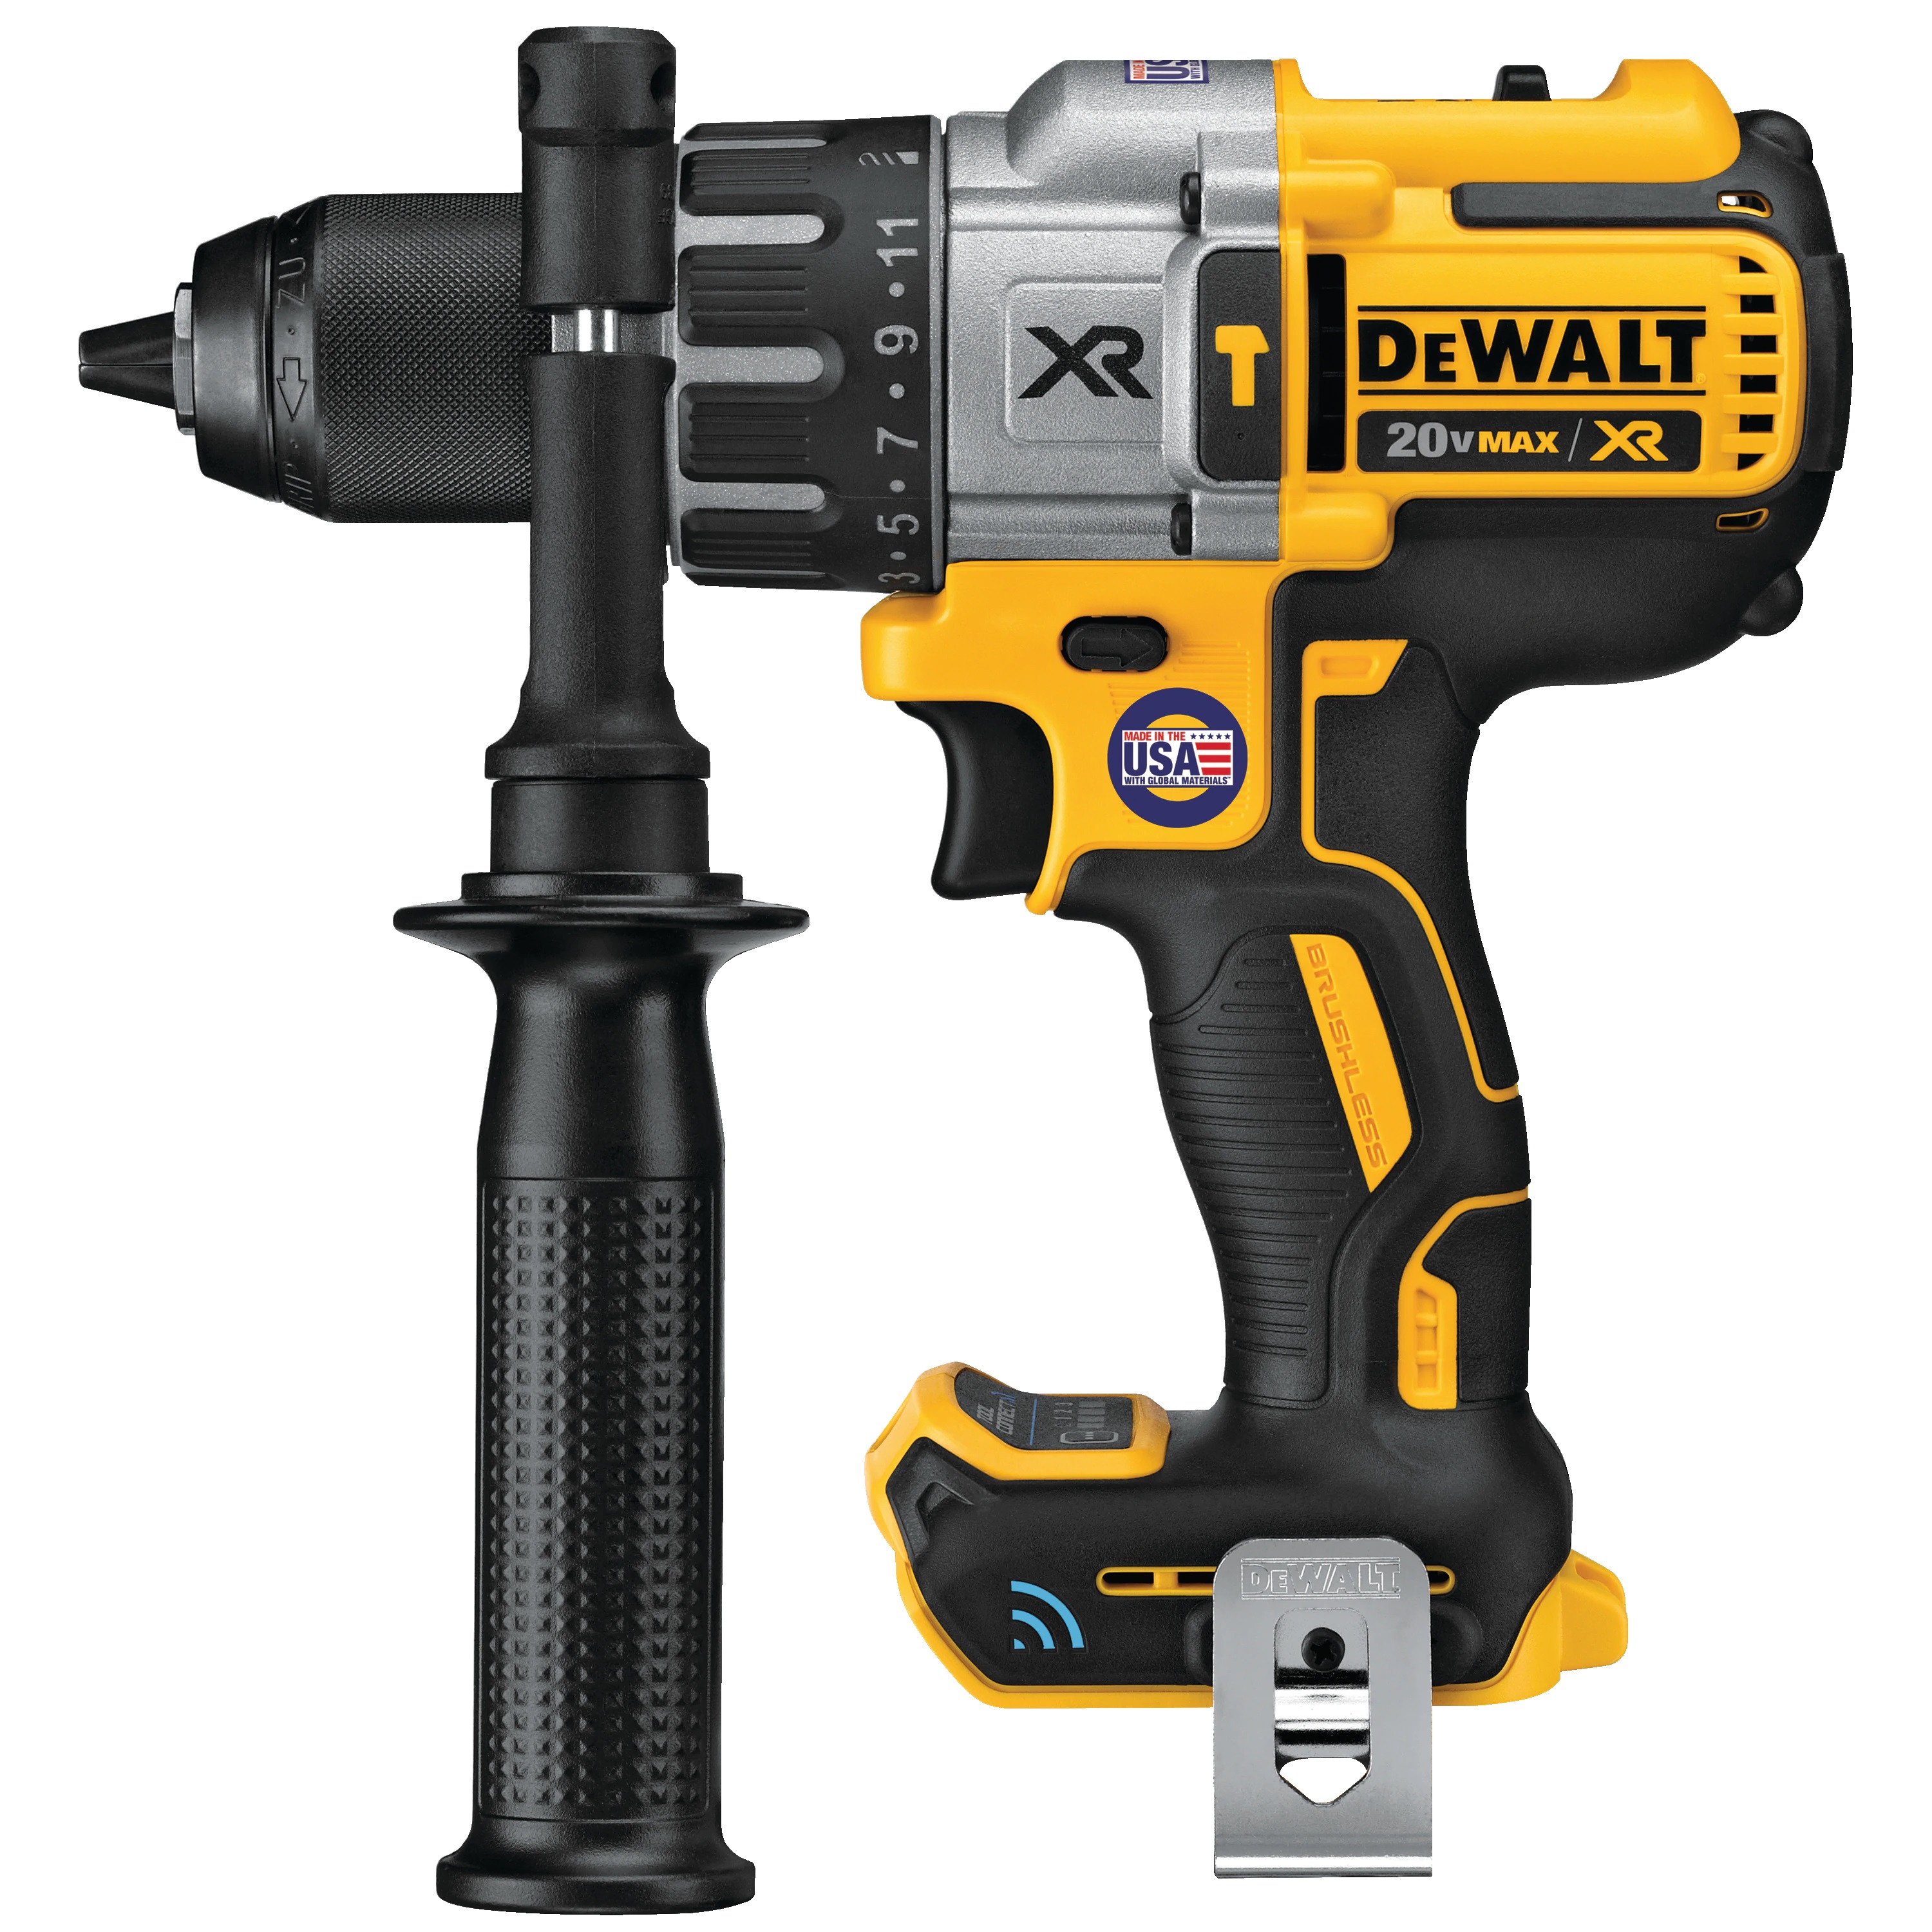 DeWalt 20V MAX* 1/2 in XR® Brushless Cordless Hammer Drill/Driver (Tool Only) - Power Tools